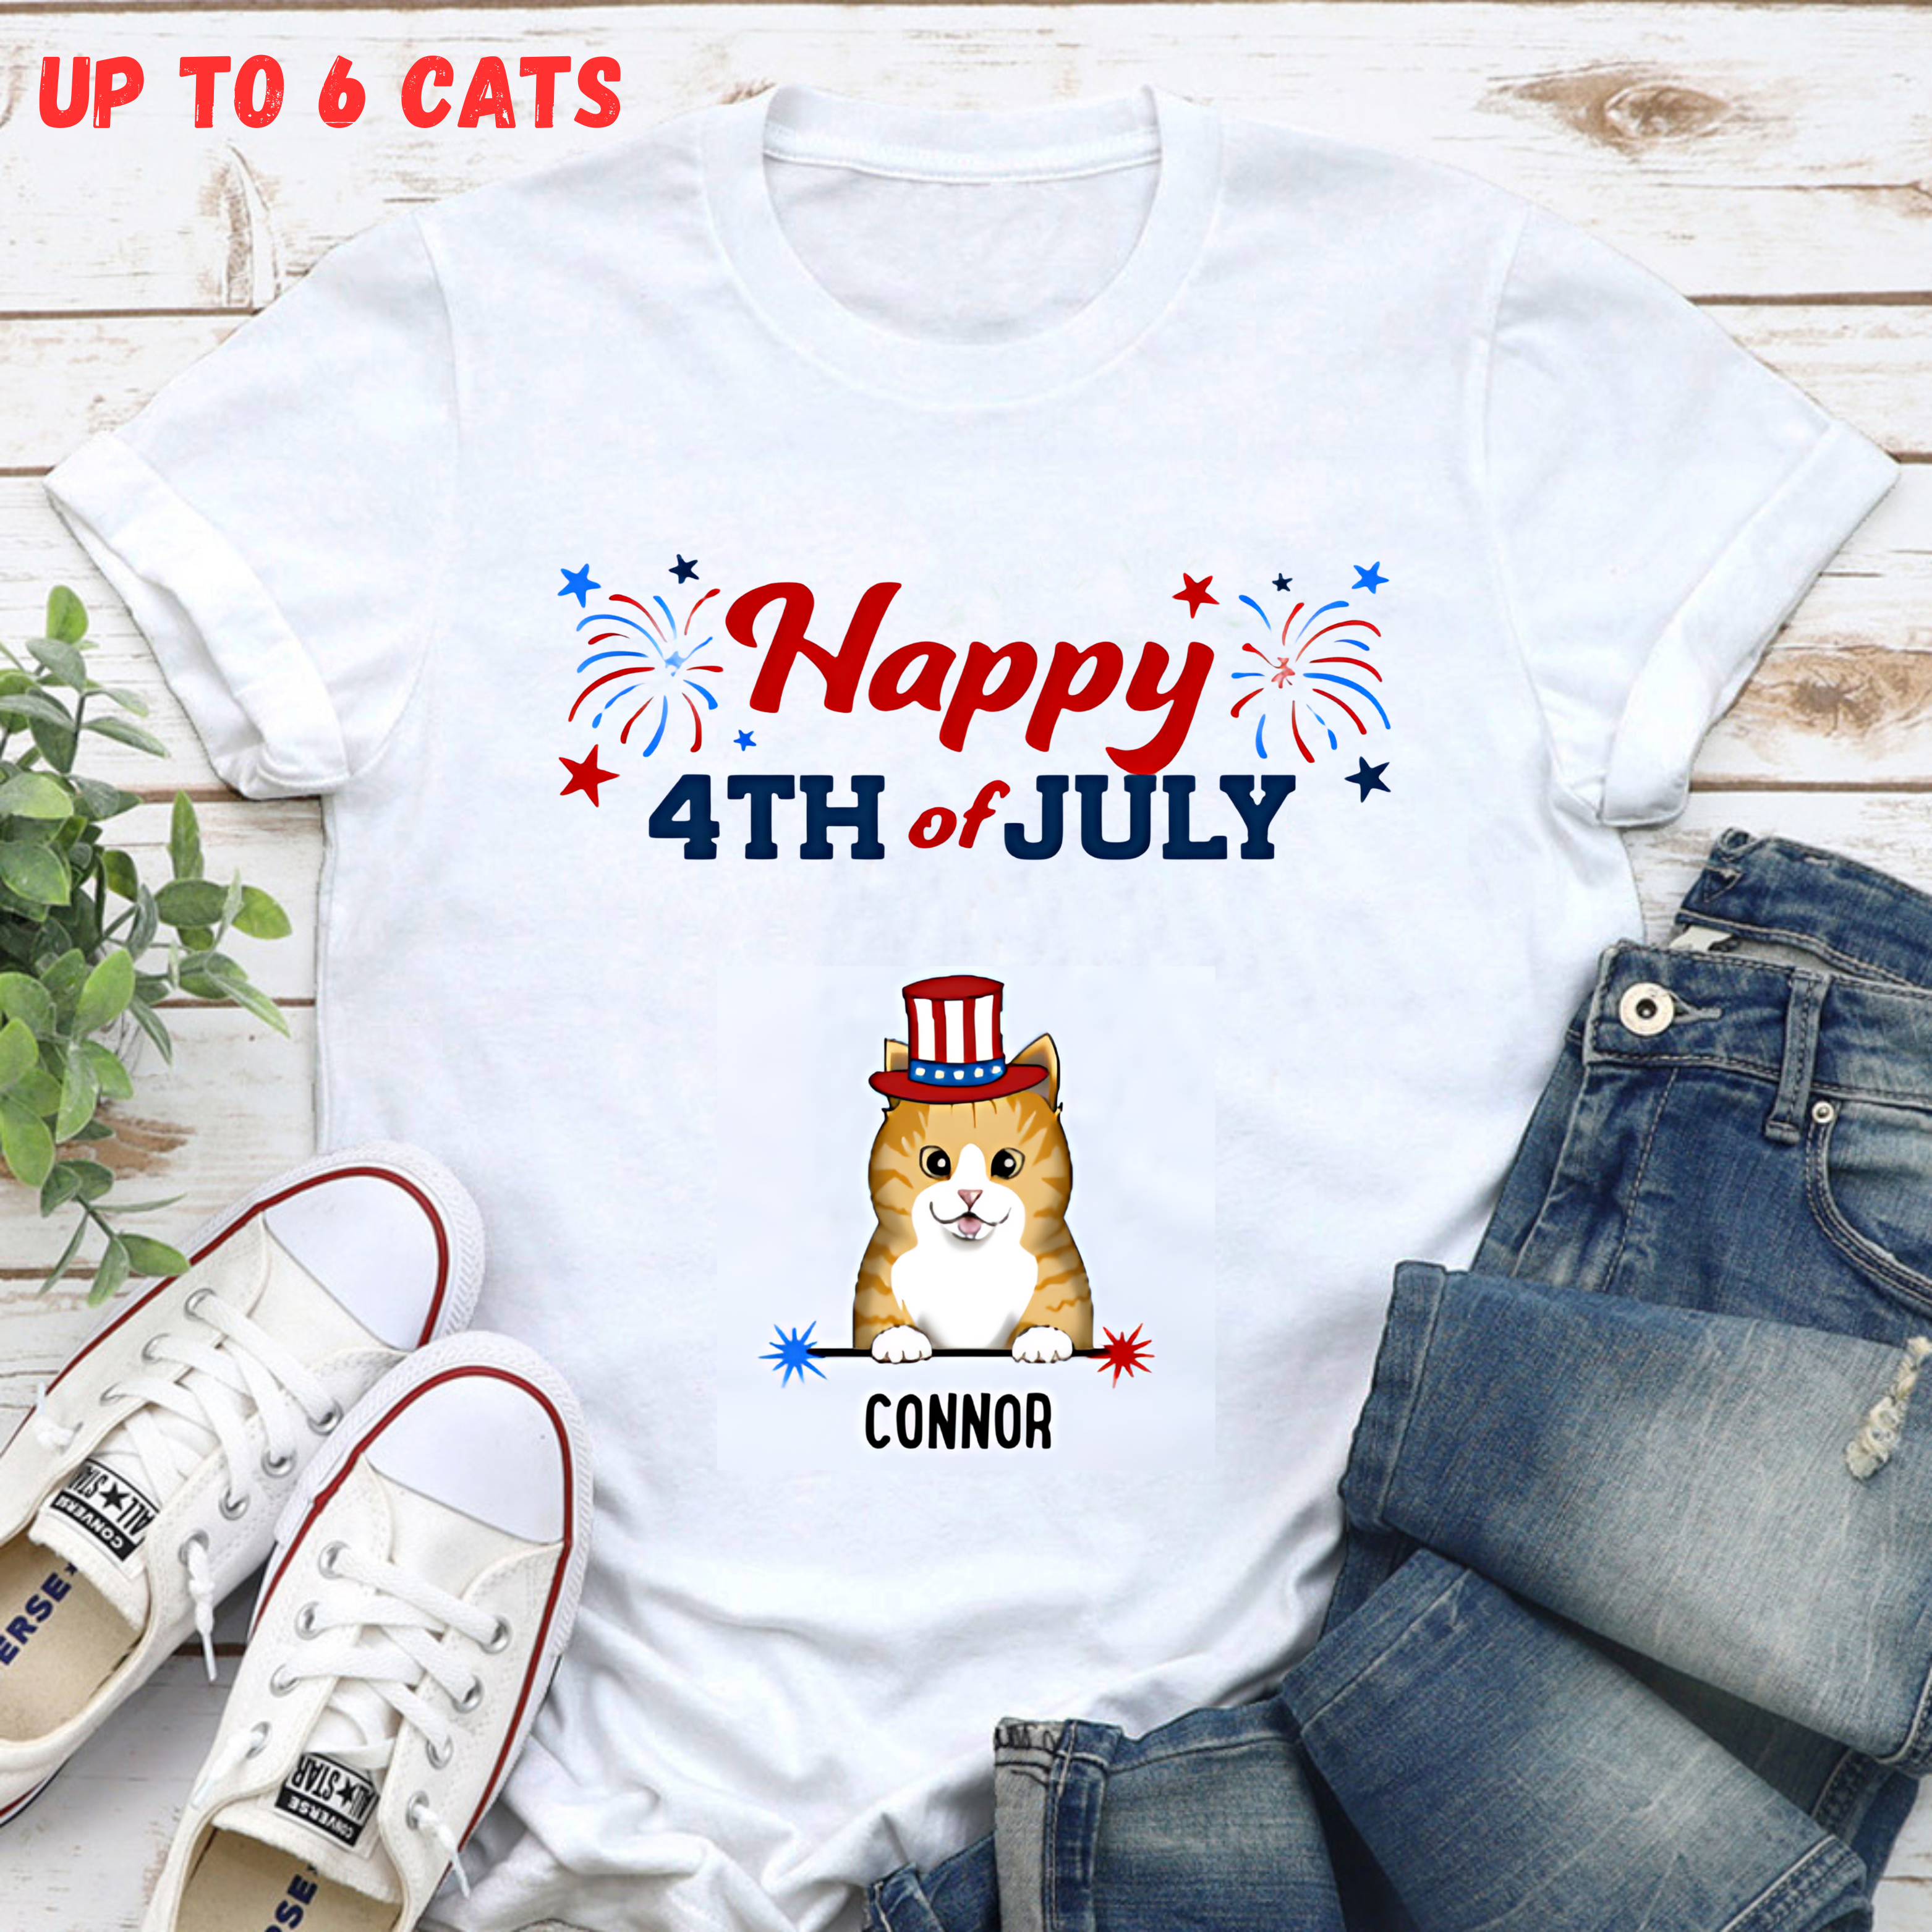 Happy 4th Of July Cats Personalized Standard Tee White- Choose Your Cat’s Breed and Name (Up to 6 Cats)